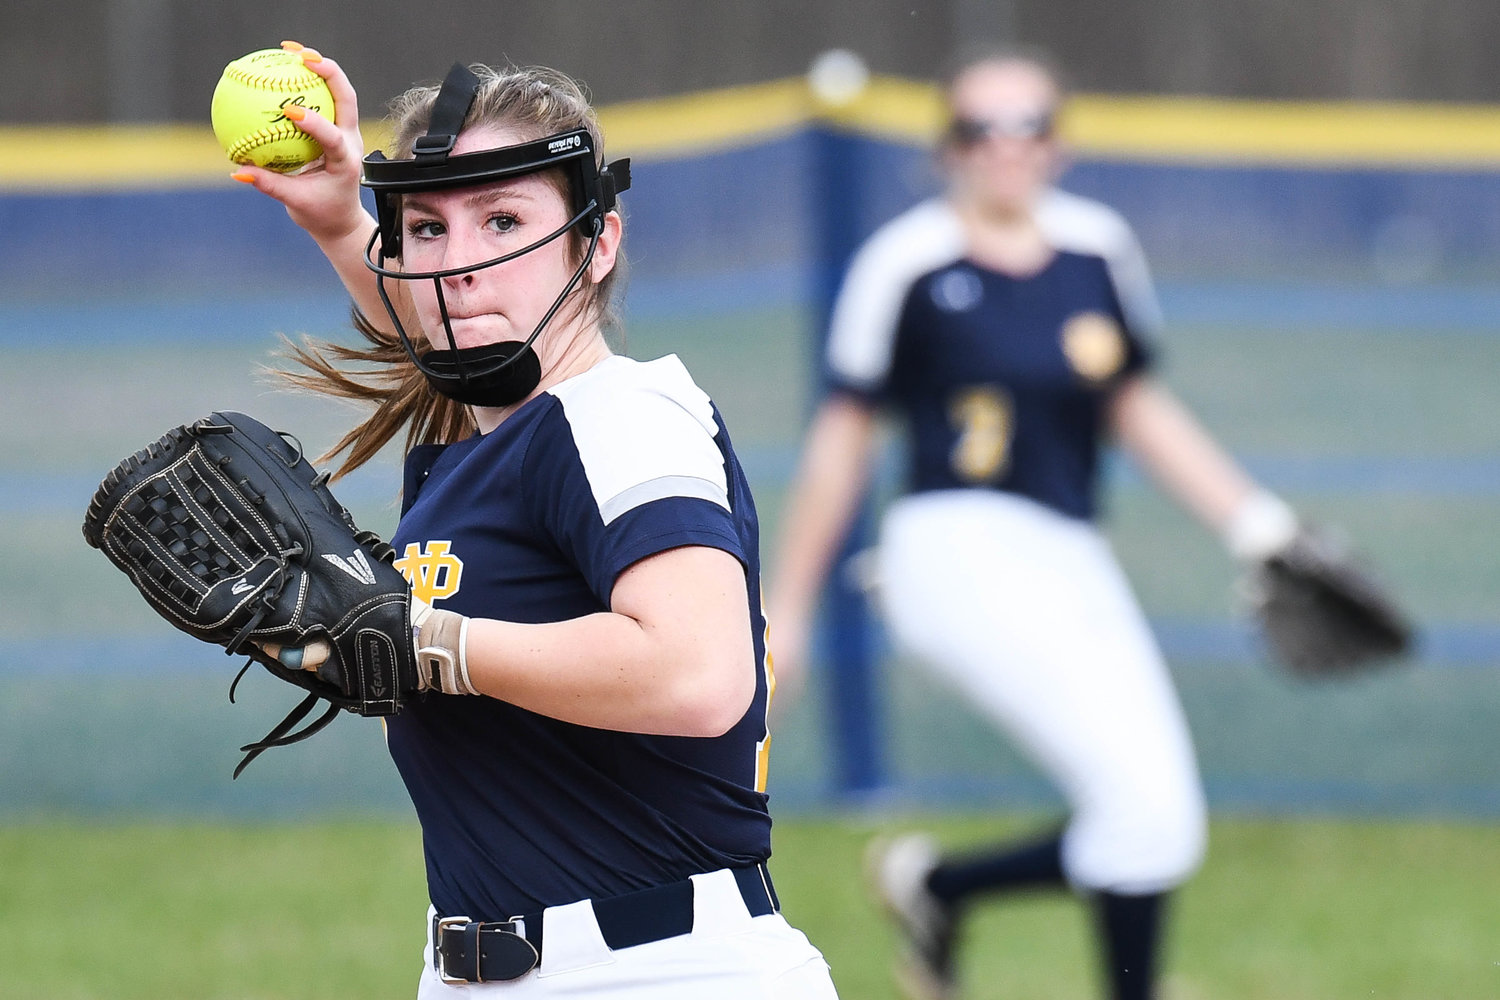 ACROSS THE DIAMOND — Notre Dame's Sam Paparella sets herself for a throw to first base during the game against Oneida on Wednesday. The Jugglers lost 5-1.